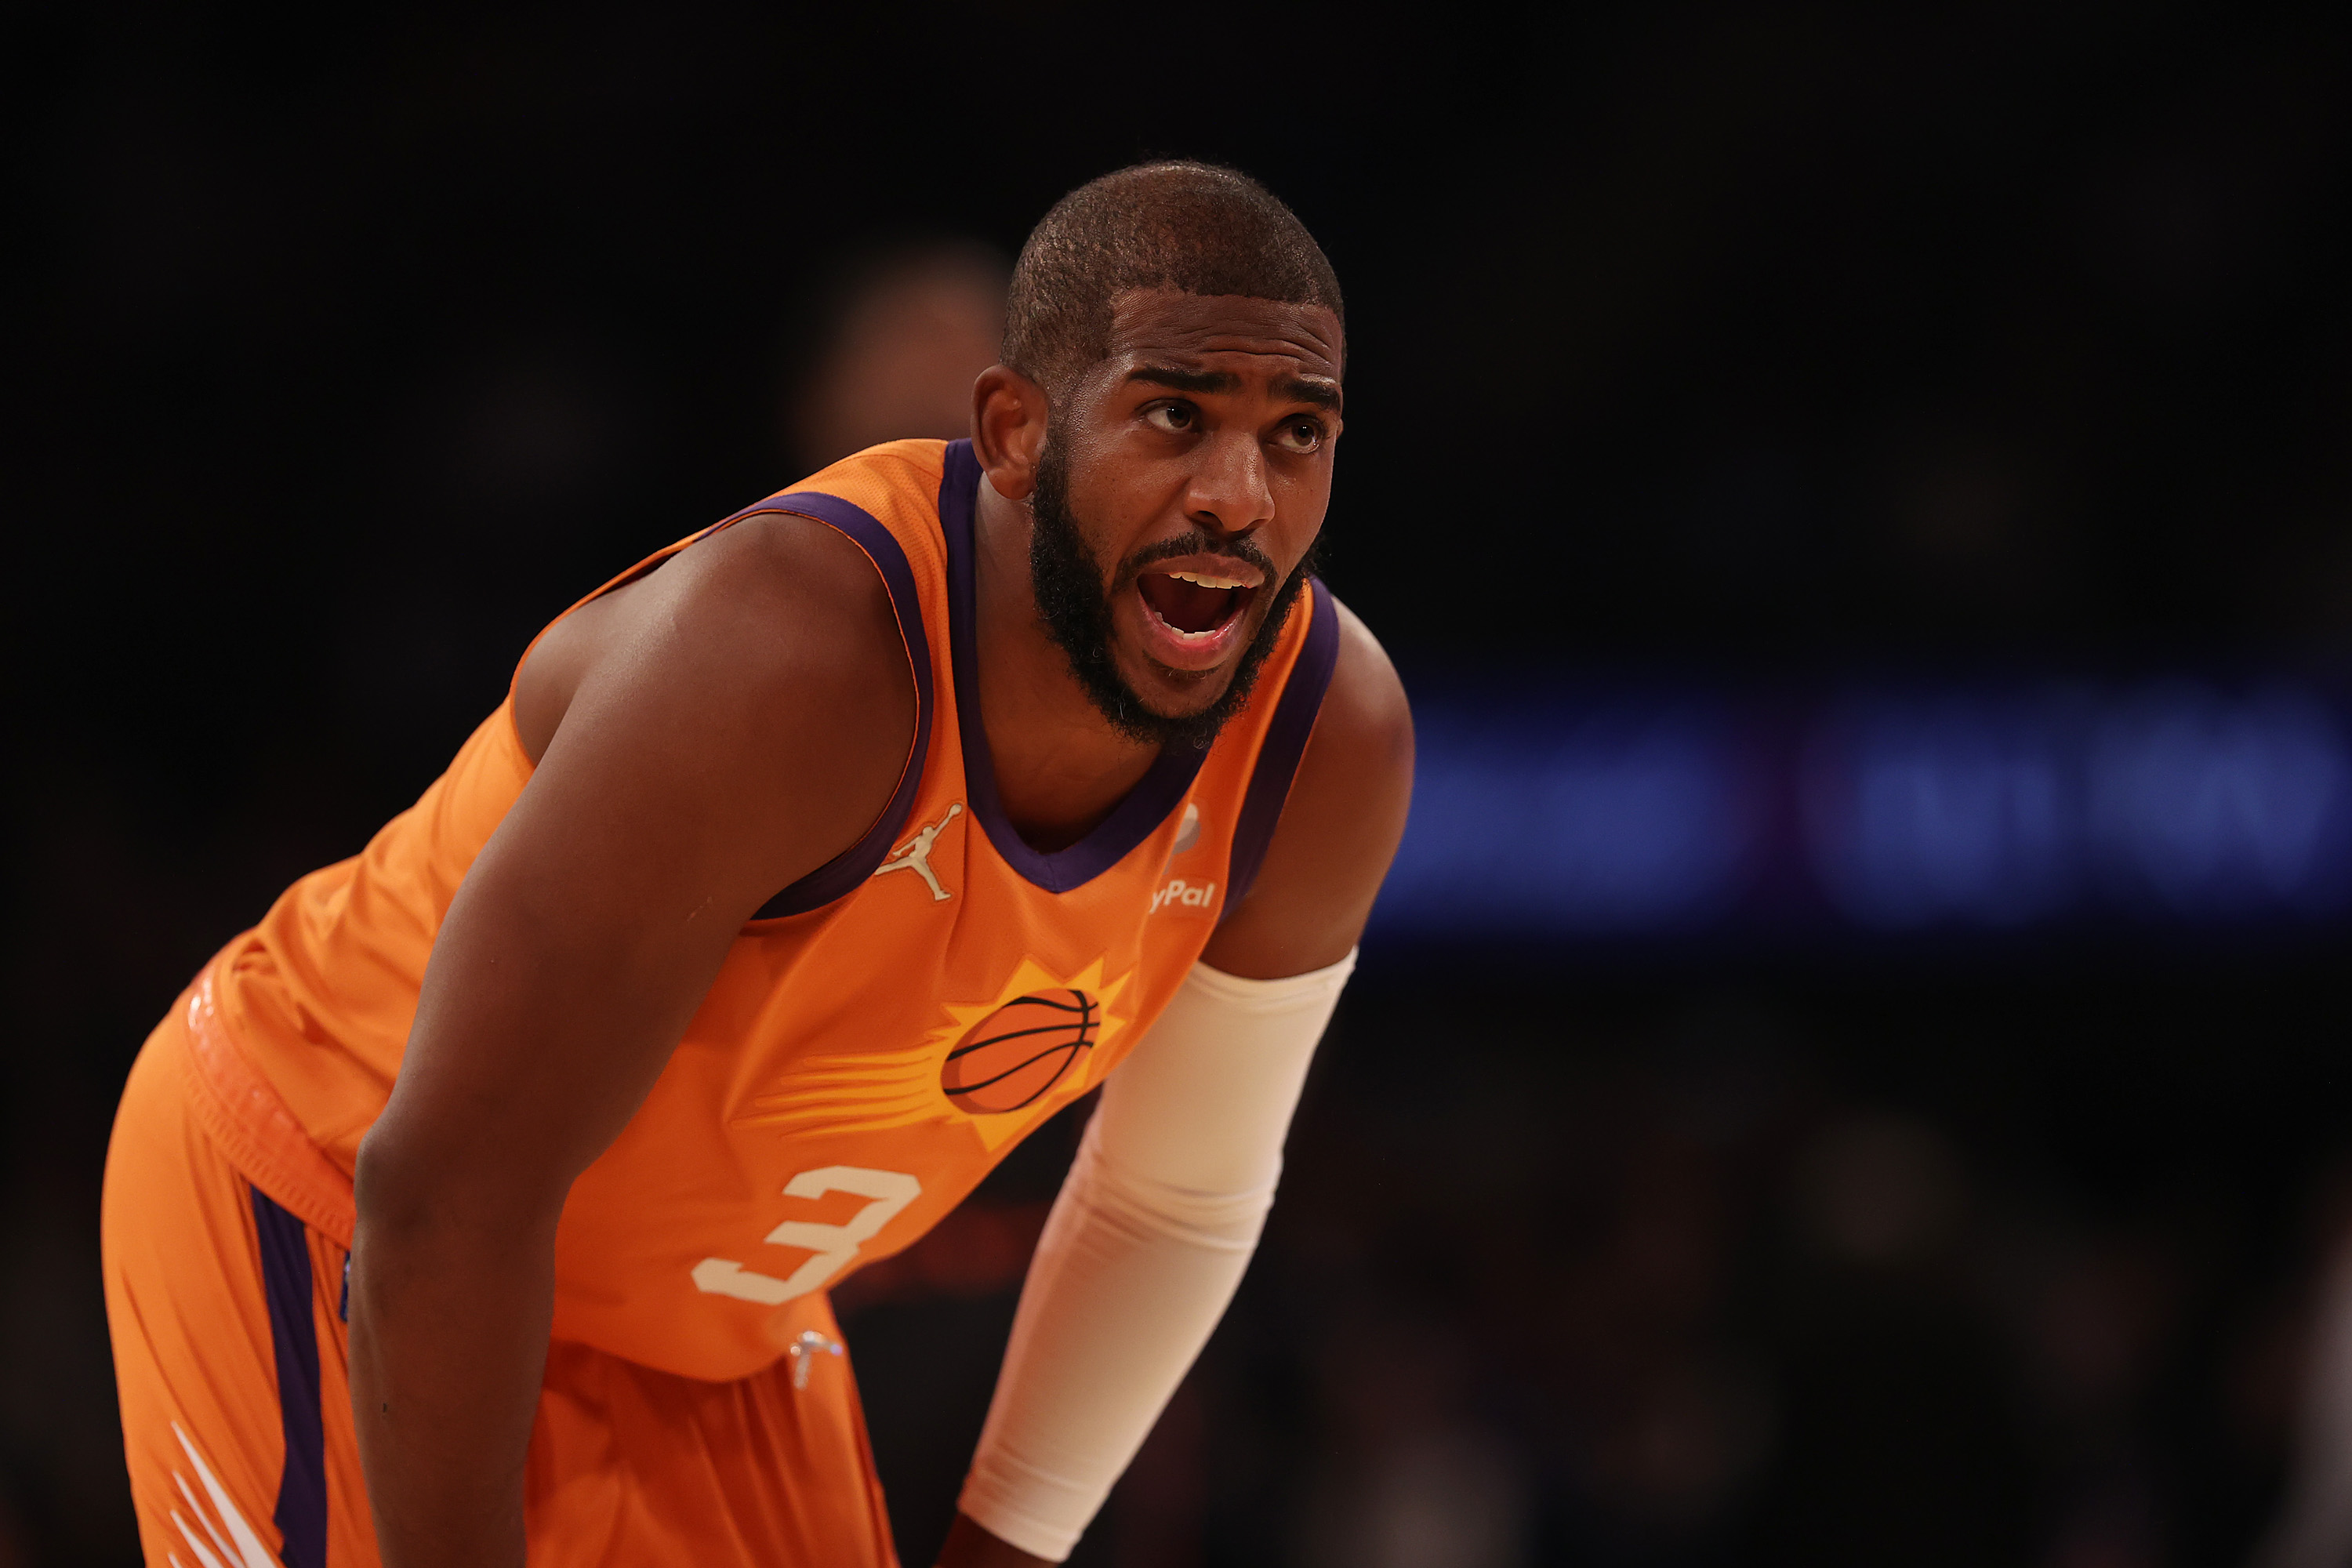 Phoenix Suns point guard Chris Paul hollers out instructions during a game against the New York Knicks